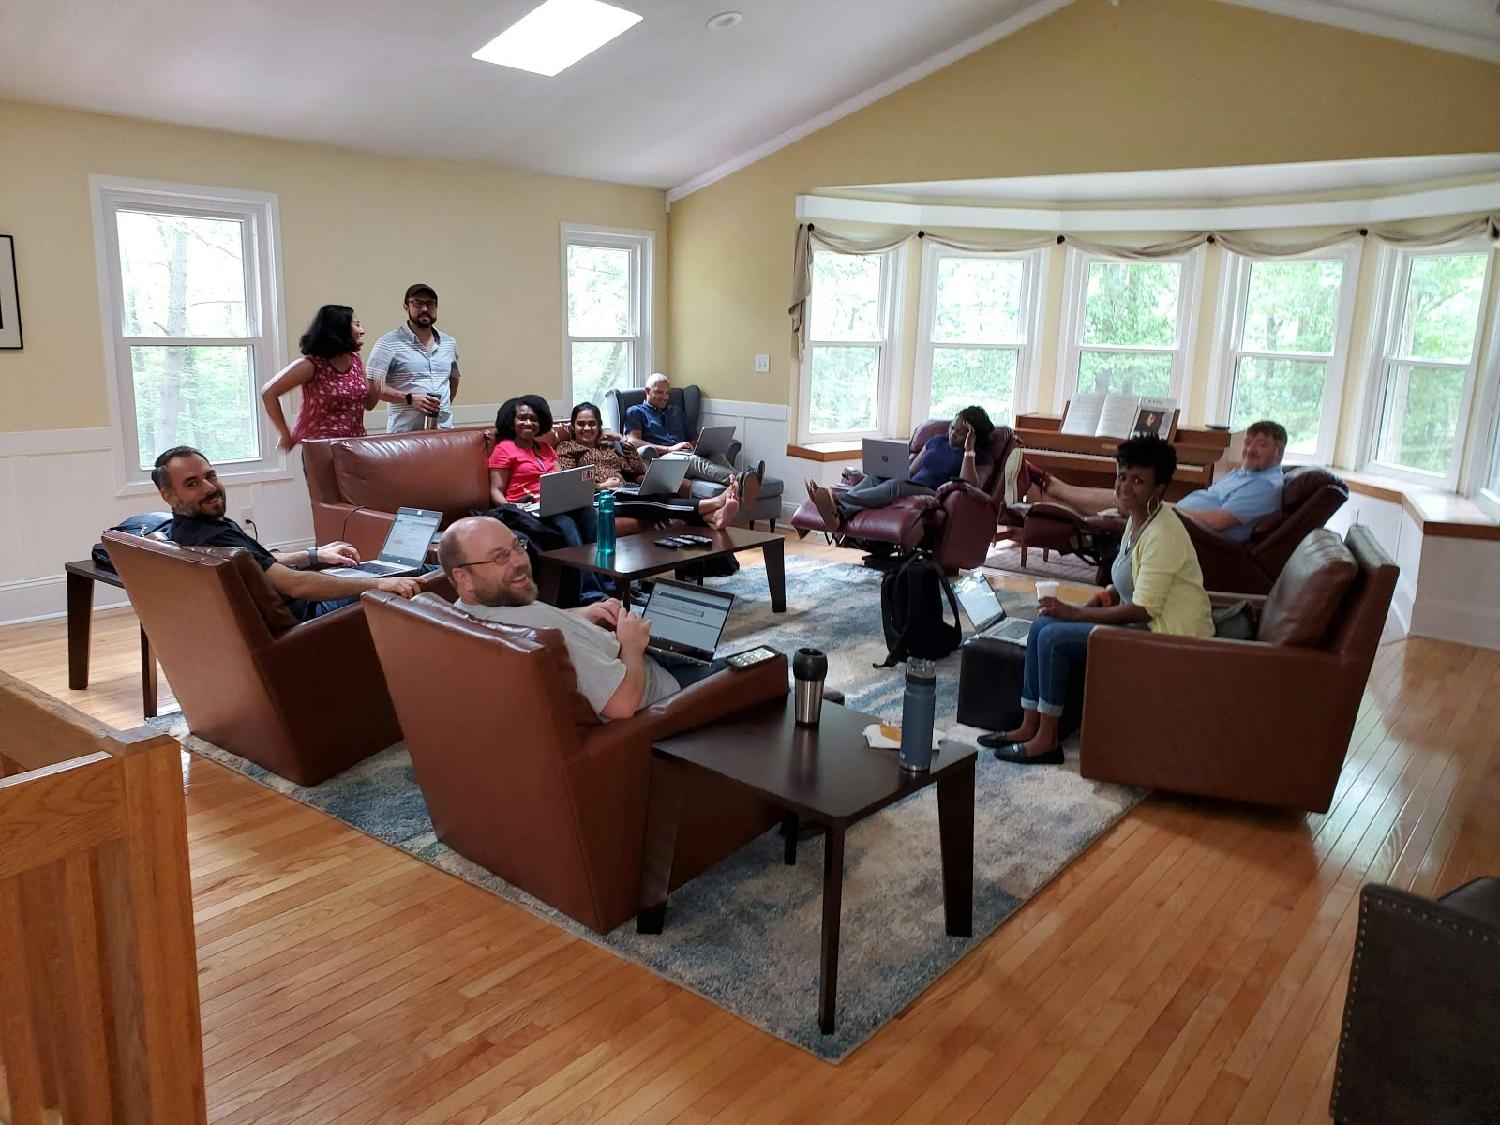 The Catoctin Getaway is a vacation home just for TCGers. Here, TCGers used the house for a team meeting and cook out.